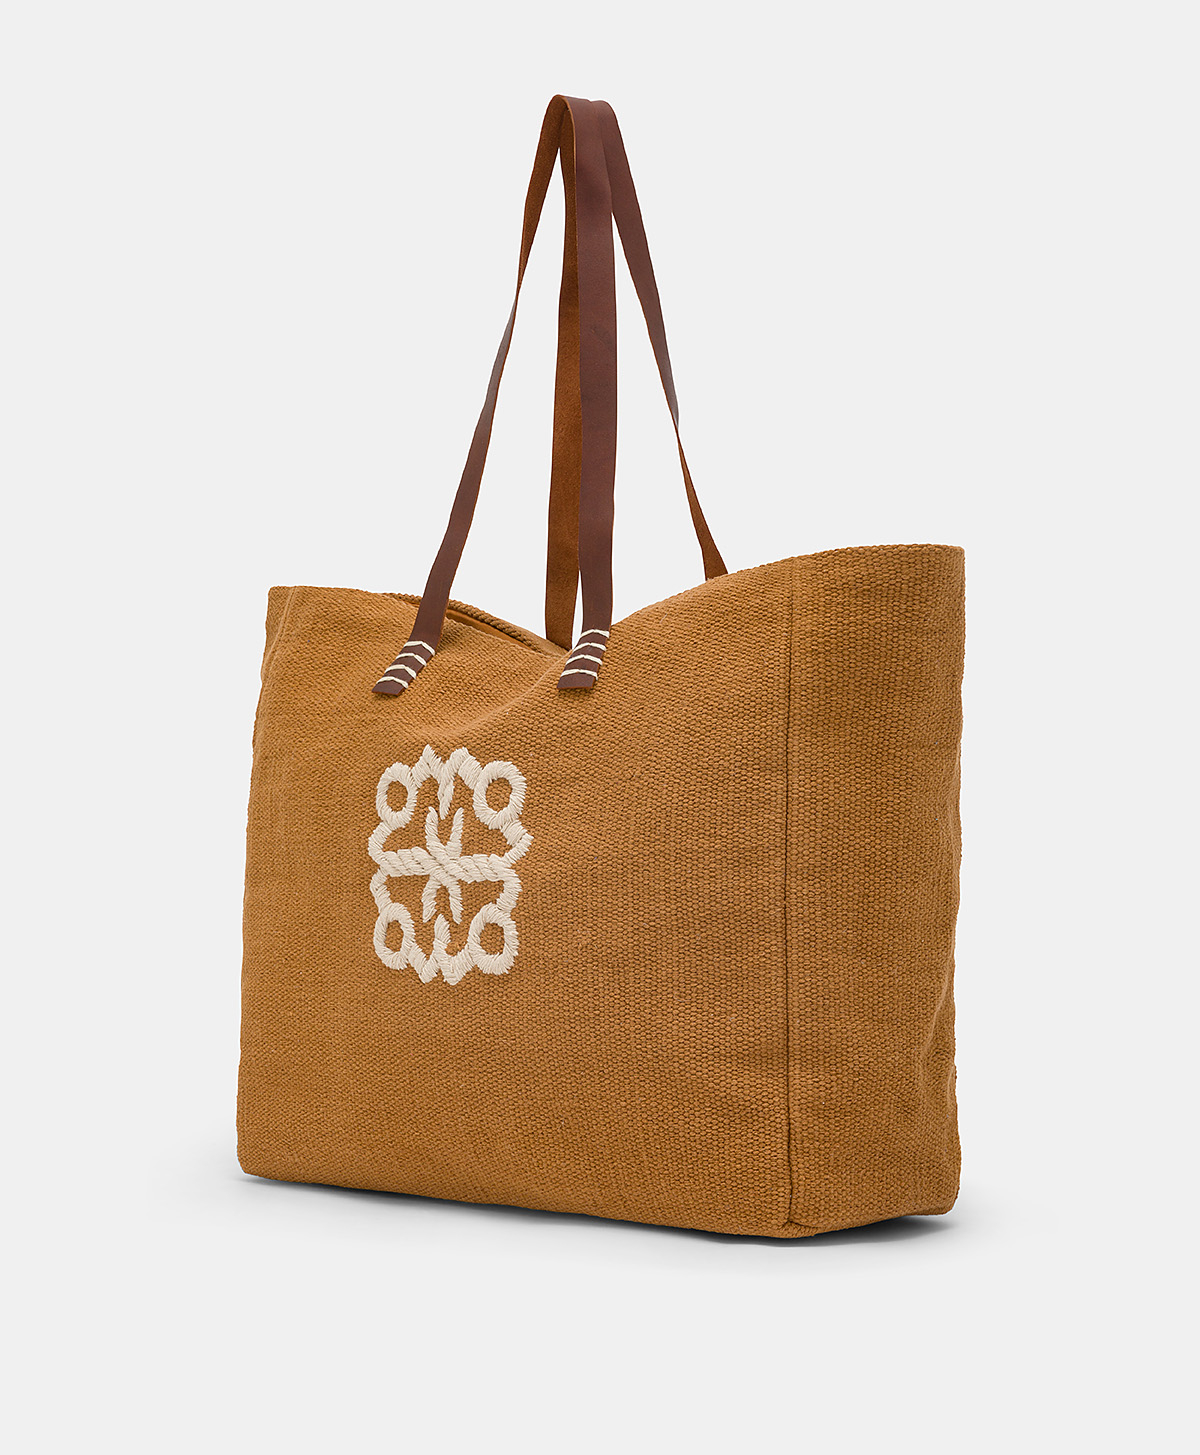 PARAGUAN BAG IN EMBROIDERED CANVAS - BRANDY - Momonì